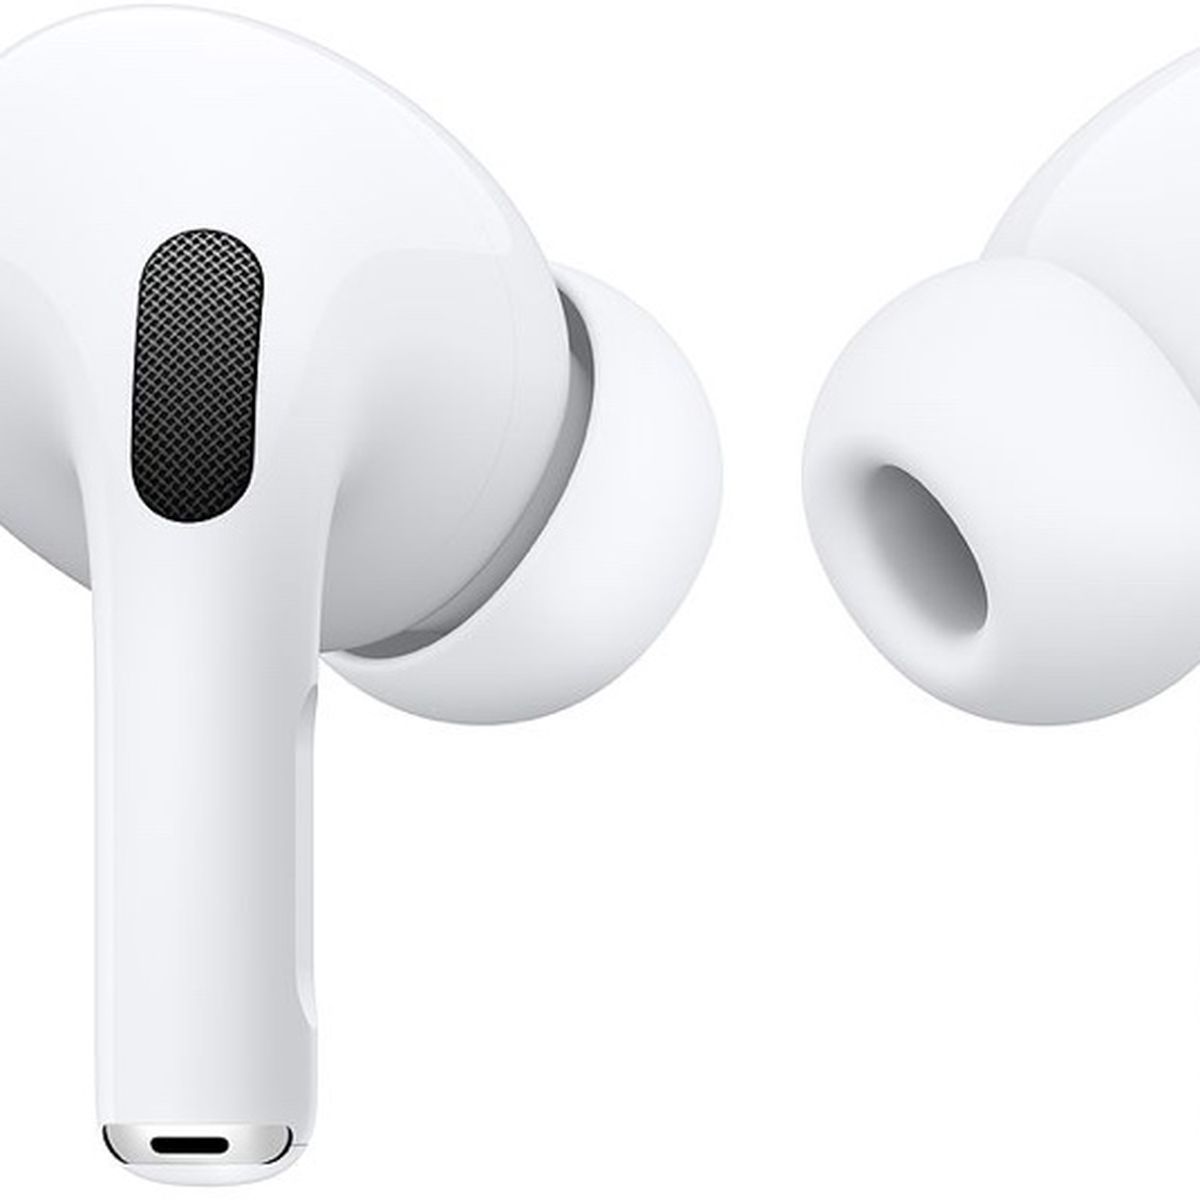 Apple Providing Free Replacement AirPods Pro Tips Under AppleCare+ 